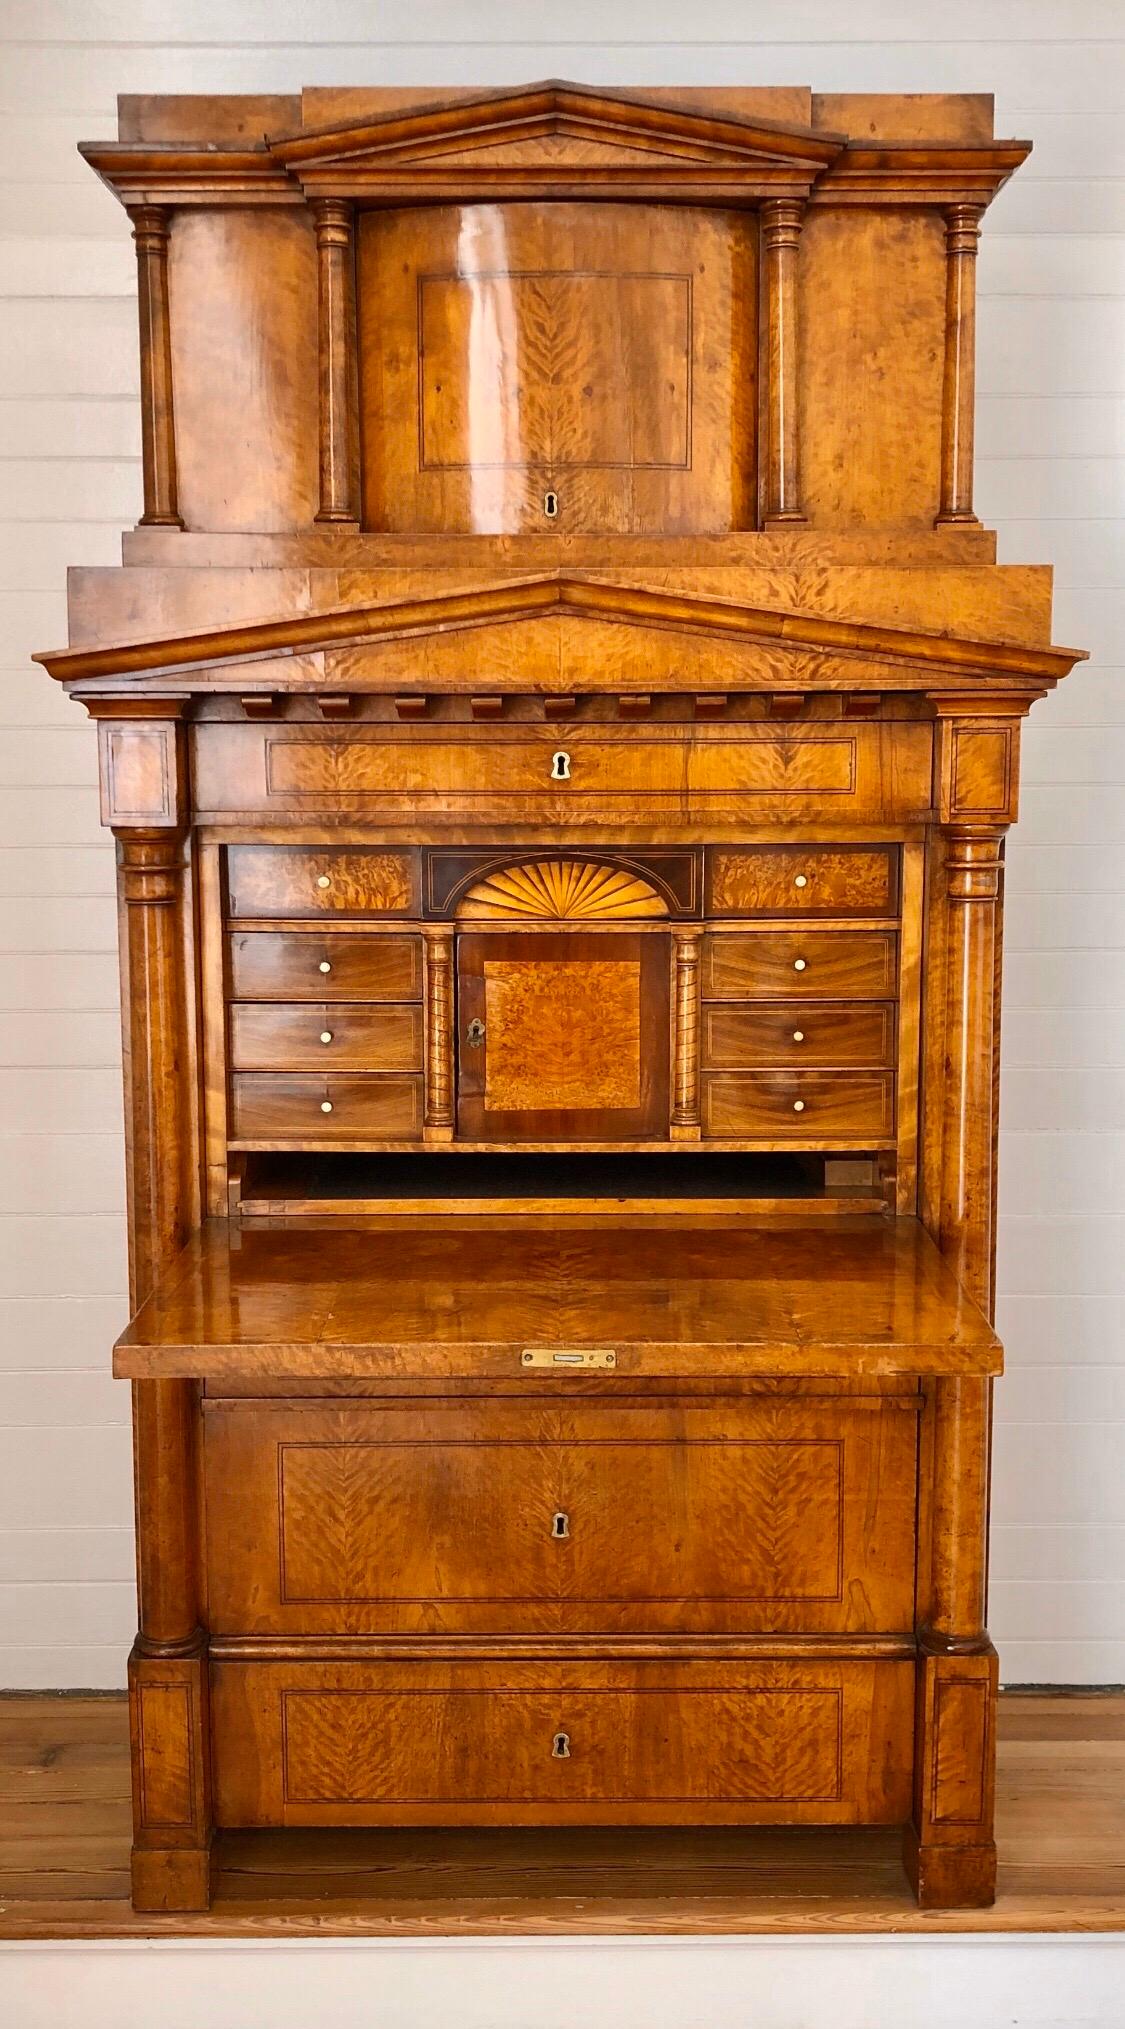 This monumental Berlin Biedermeier Secretaire is one of the finest examples with its Classical Architecture of Doric Pediments, Columns, and Dental Moldings. The main structure of the Secretaire has a majestic architectural superstructural cabinet